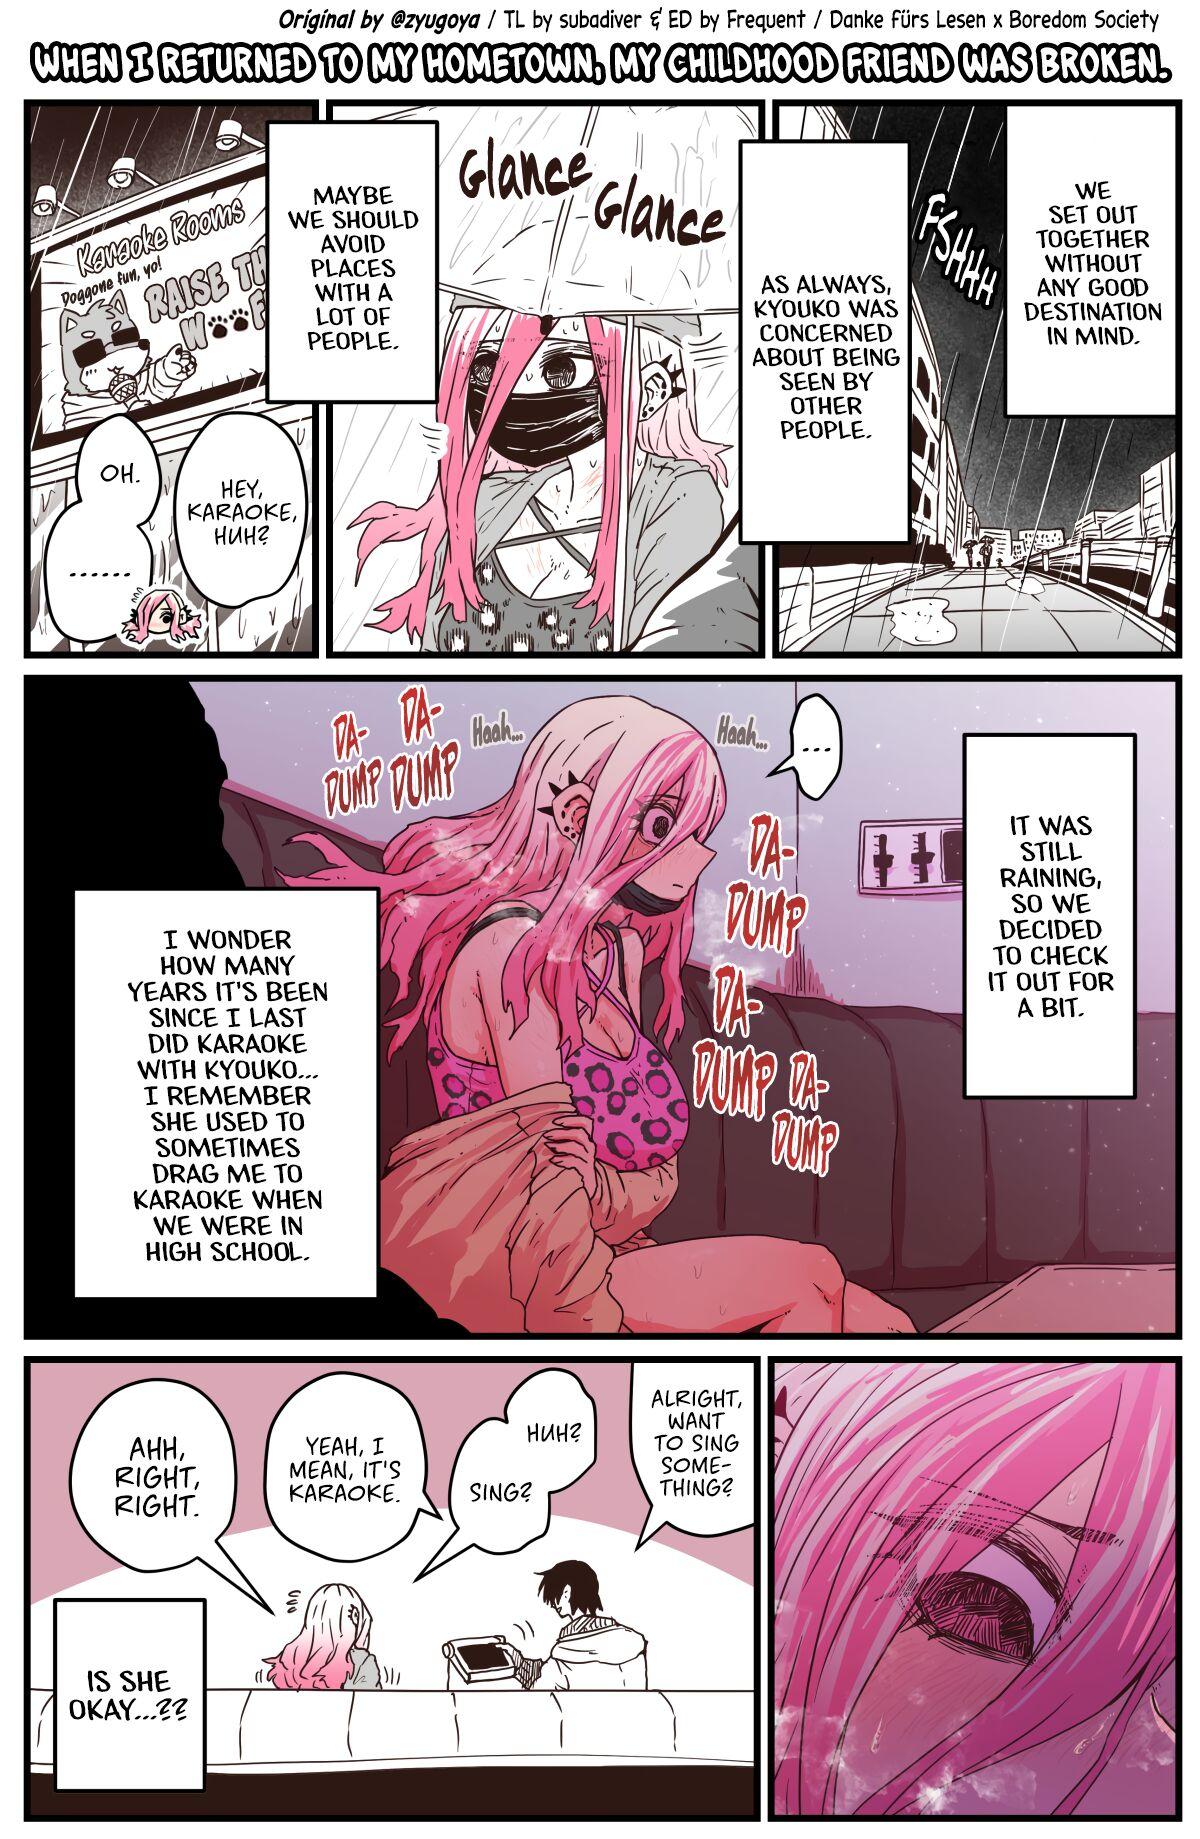 Buttfucking When I Returned to My Hometown, My Childhood Friend was Broken - Original First - Page 8